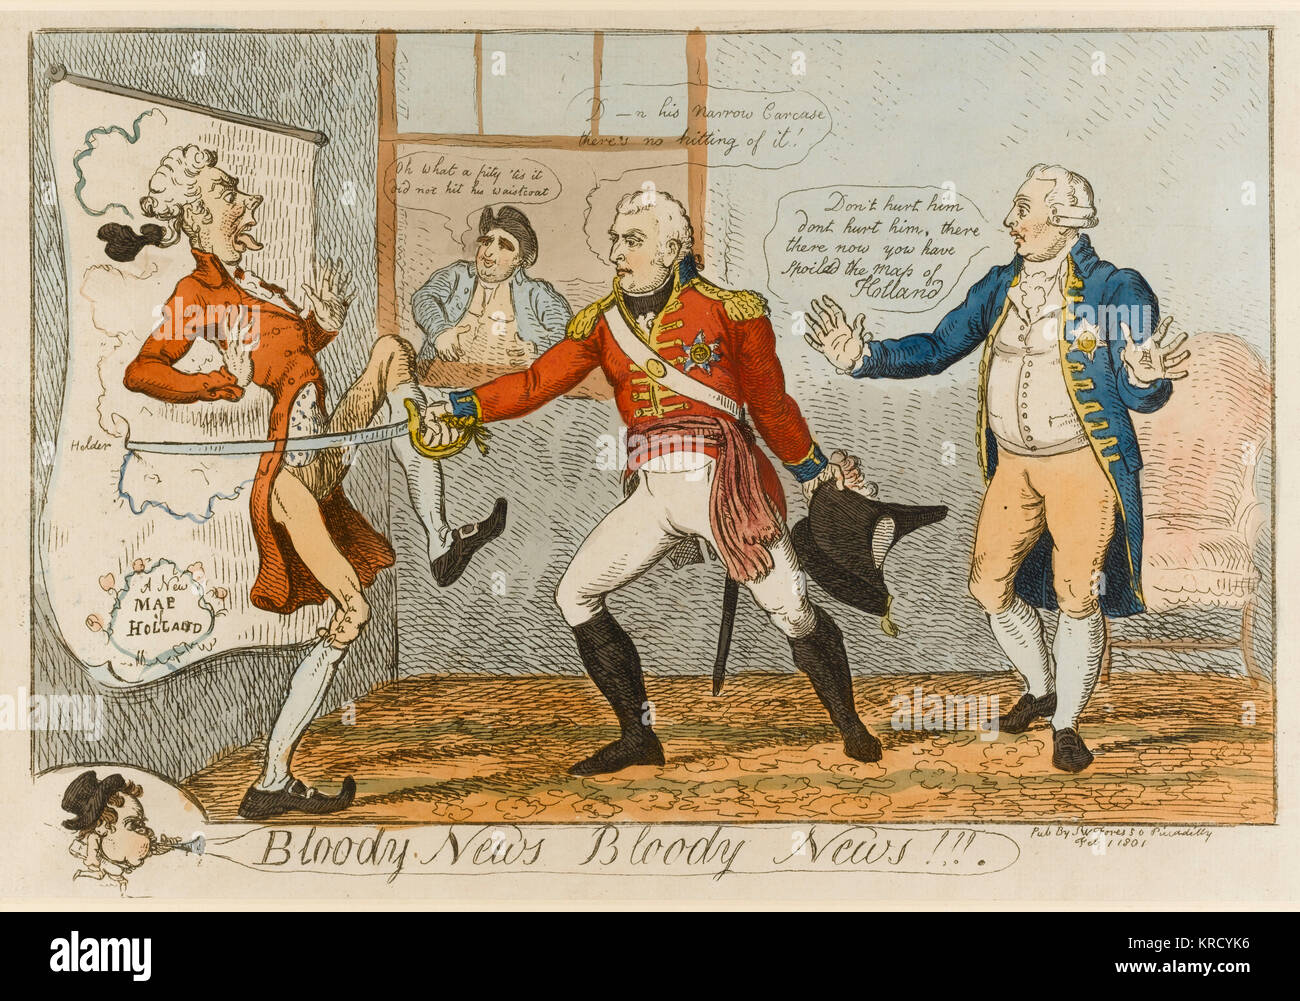 Satirical cartoon, Bloody News, Bloody News!!!  The (Grand Old) Duke of York, in regimentals, was commander-in-chief of the ill-conceived  'Secret Expedition' to the Helder in North Holland in 1799.  Wielding a sabre he stabs at a point on a hanging map and clumsily pierces Pitts jacket.  Fox appearing through a window says 'Oh what a pity 'tis it did not hit his waistcoat'.  The King, the Duke's father, implores: 'Don't hurt him ... there there now ...'.       Date: 1801 Stock Photo